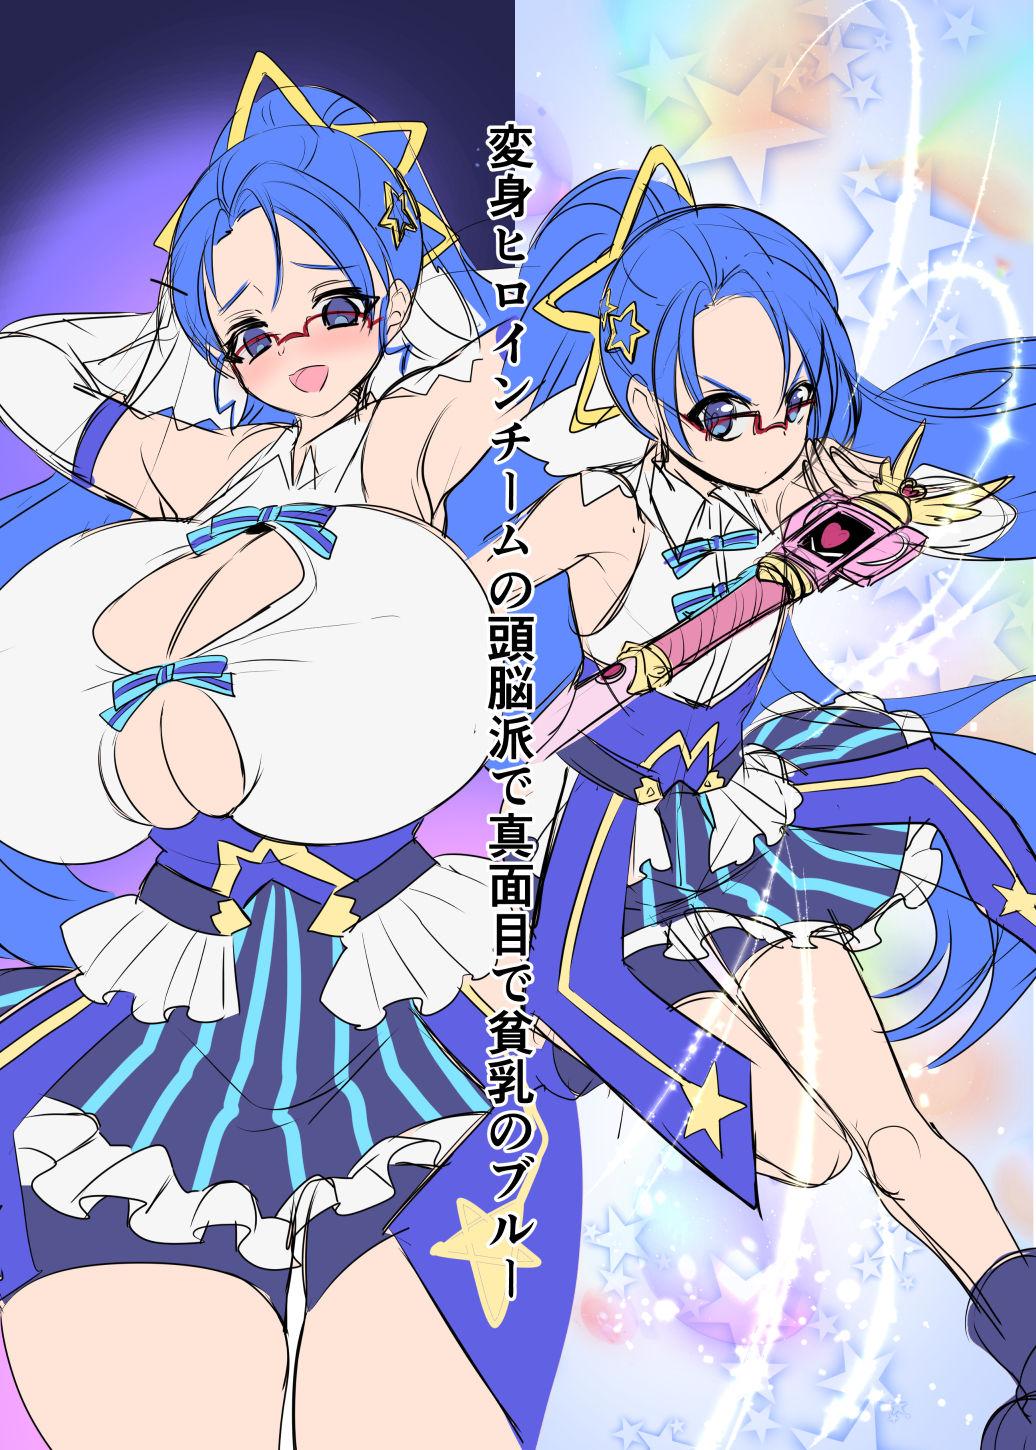 Henshin Heroine Team no Zunouha de Majime de Hinnyuu no Blue | The Smart, Diligent and Flat-Chested Blue from the Team of Morphing Heroines 66